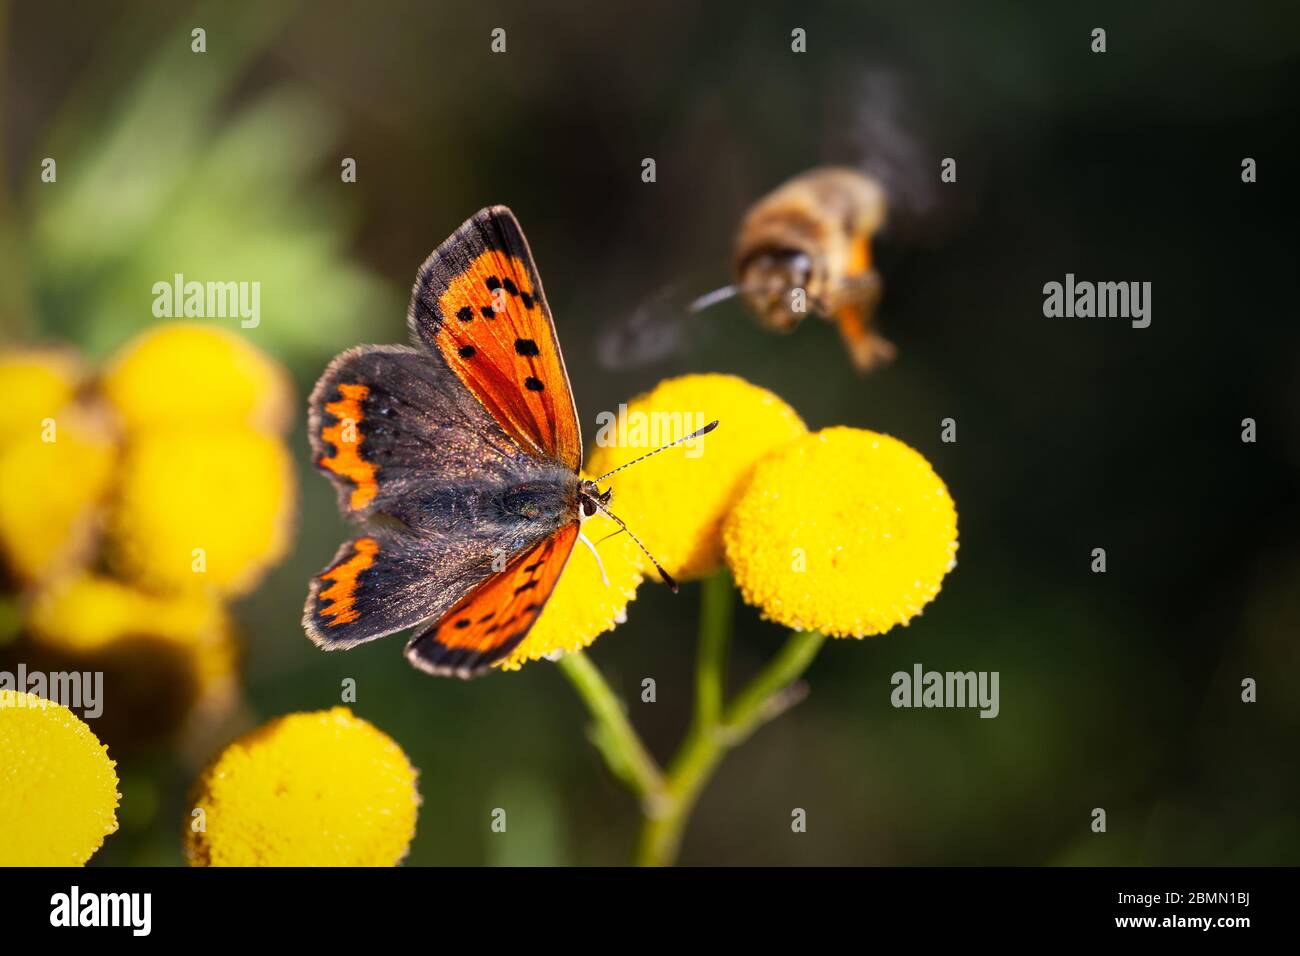 Close-up of a butterfly on yellow flower Stock Photo